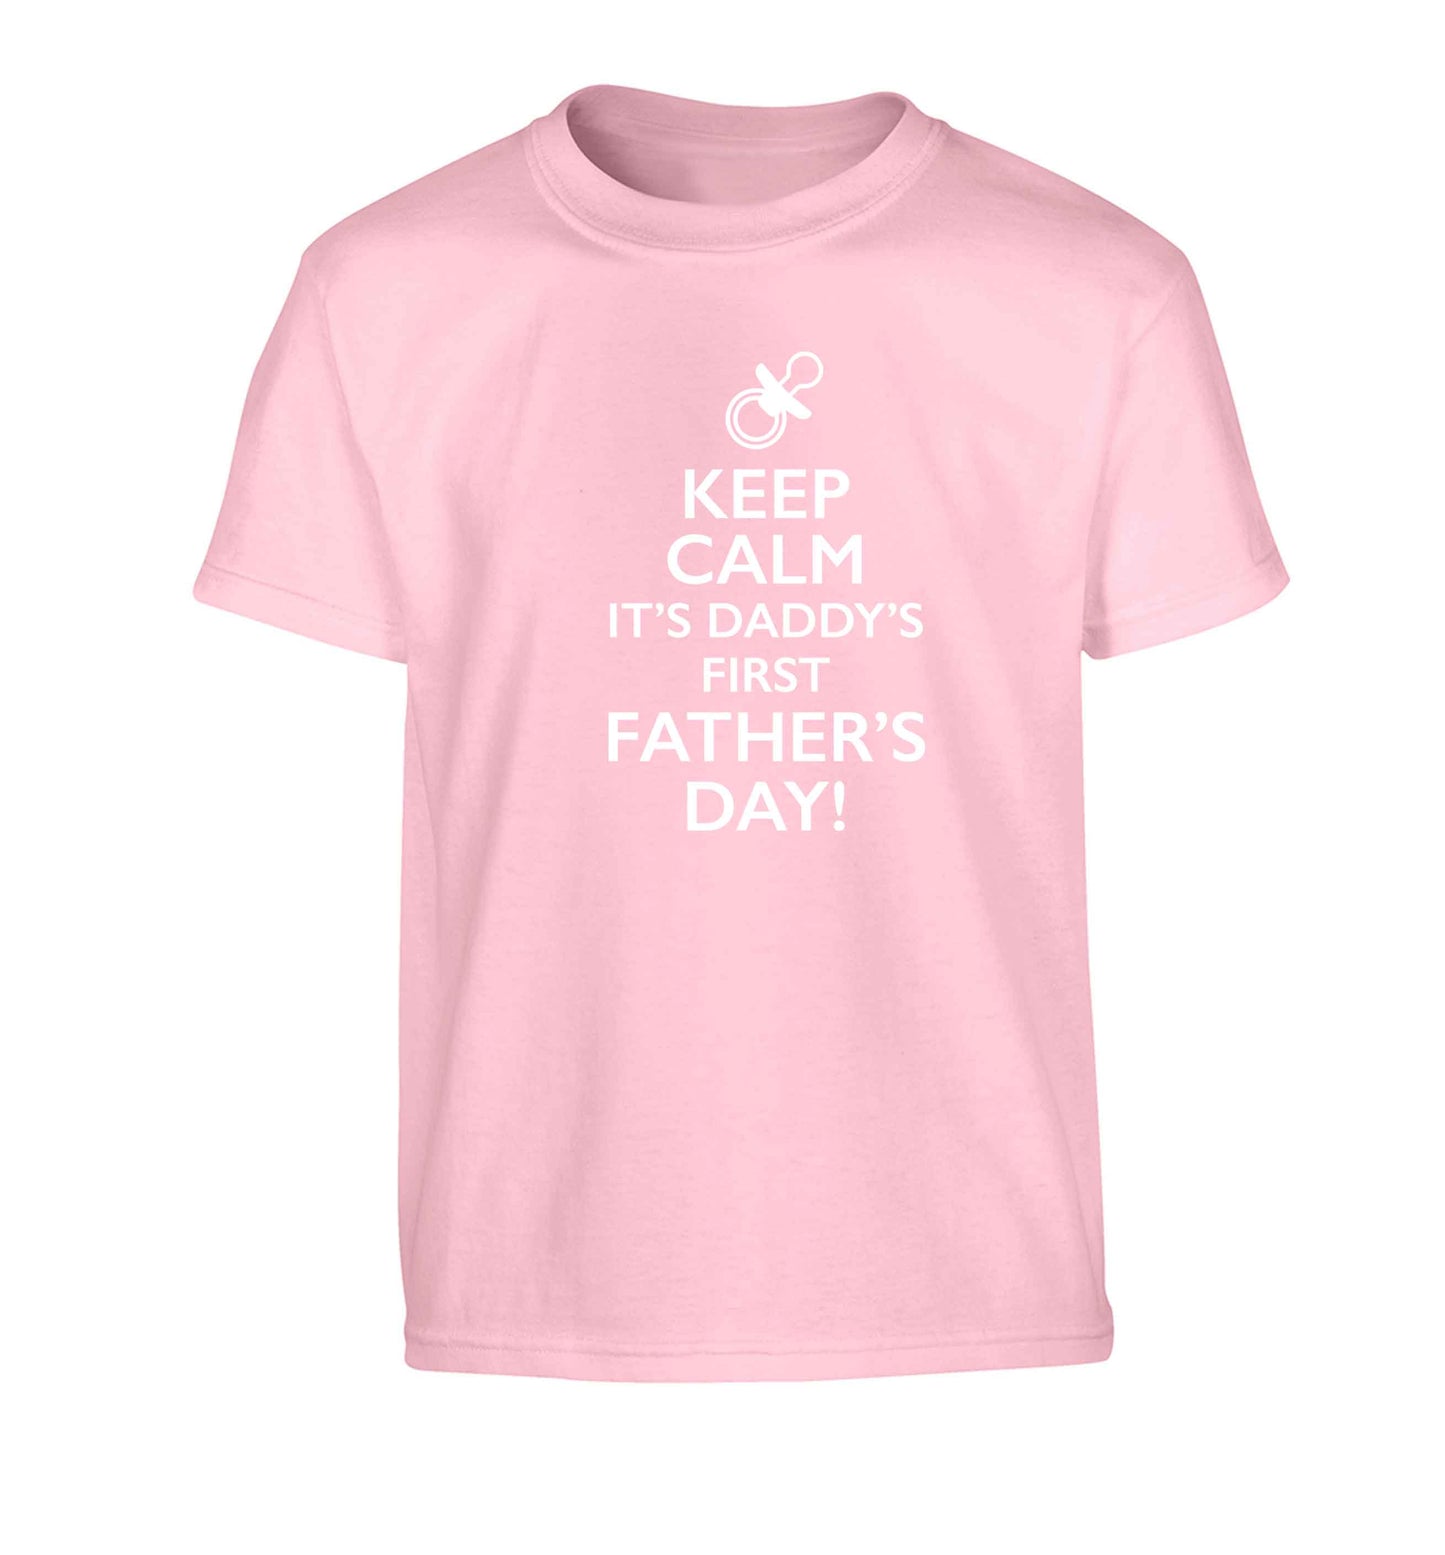 Keep calm it's daddys first father's day Children's light pink Tshirt 12-13 Years